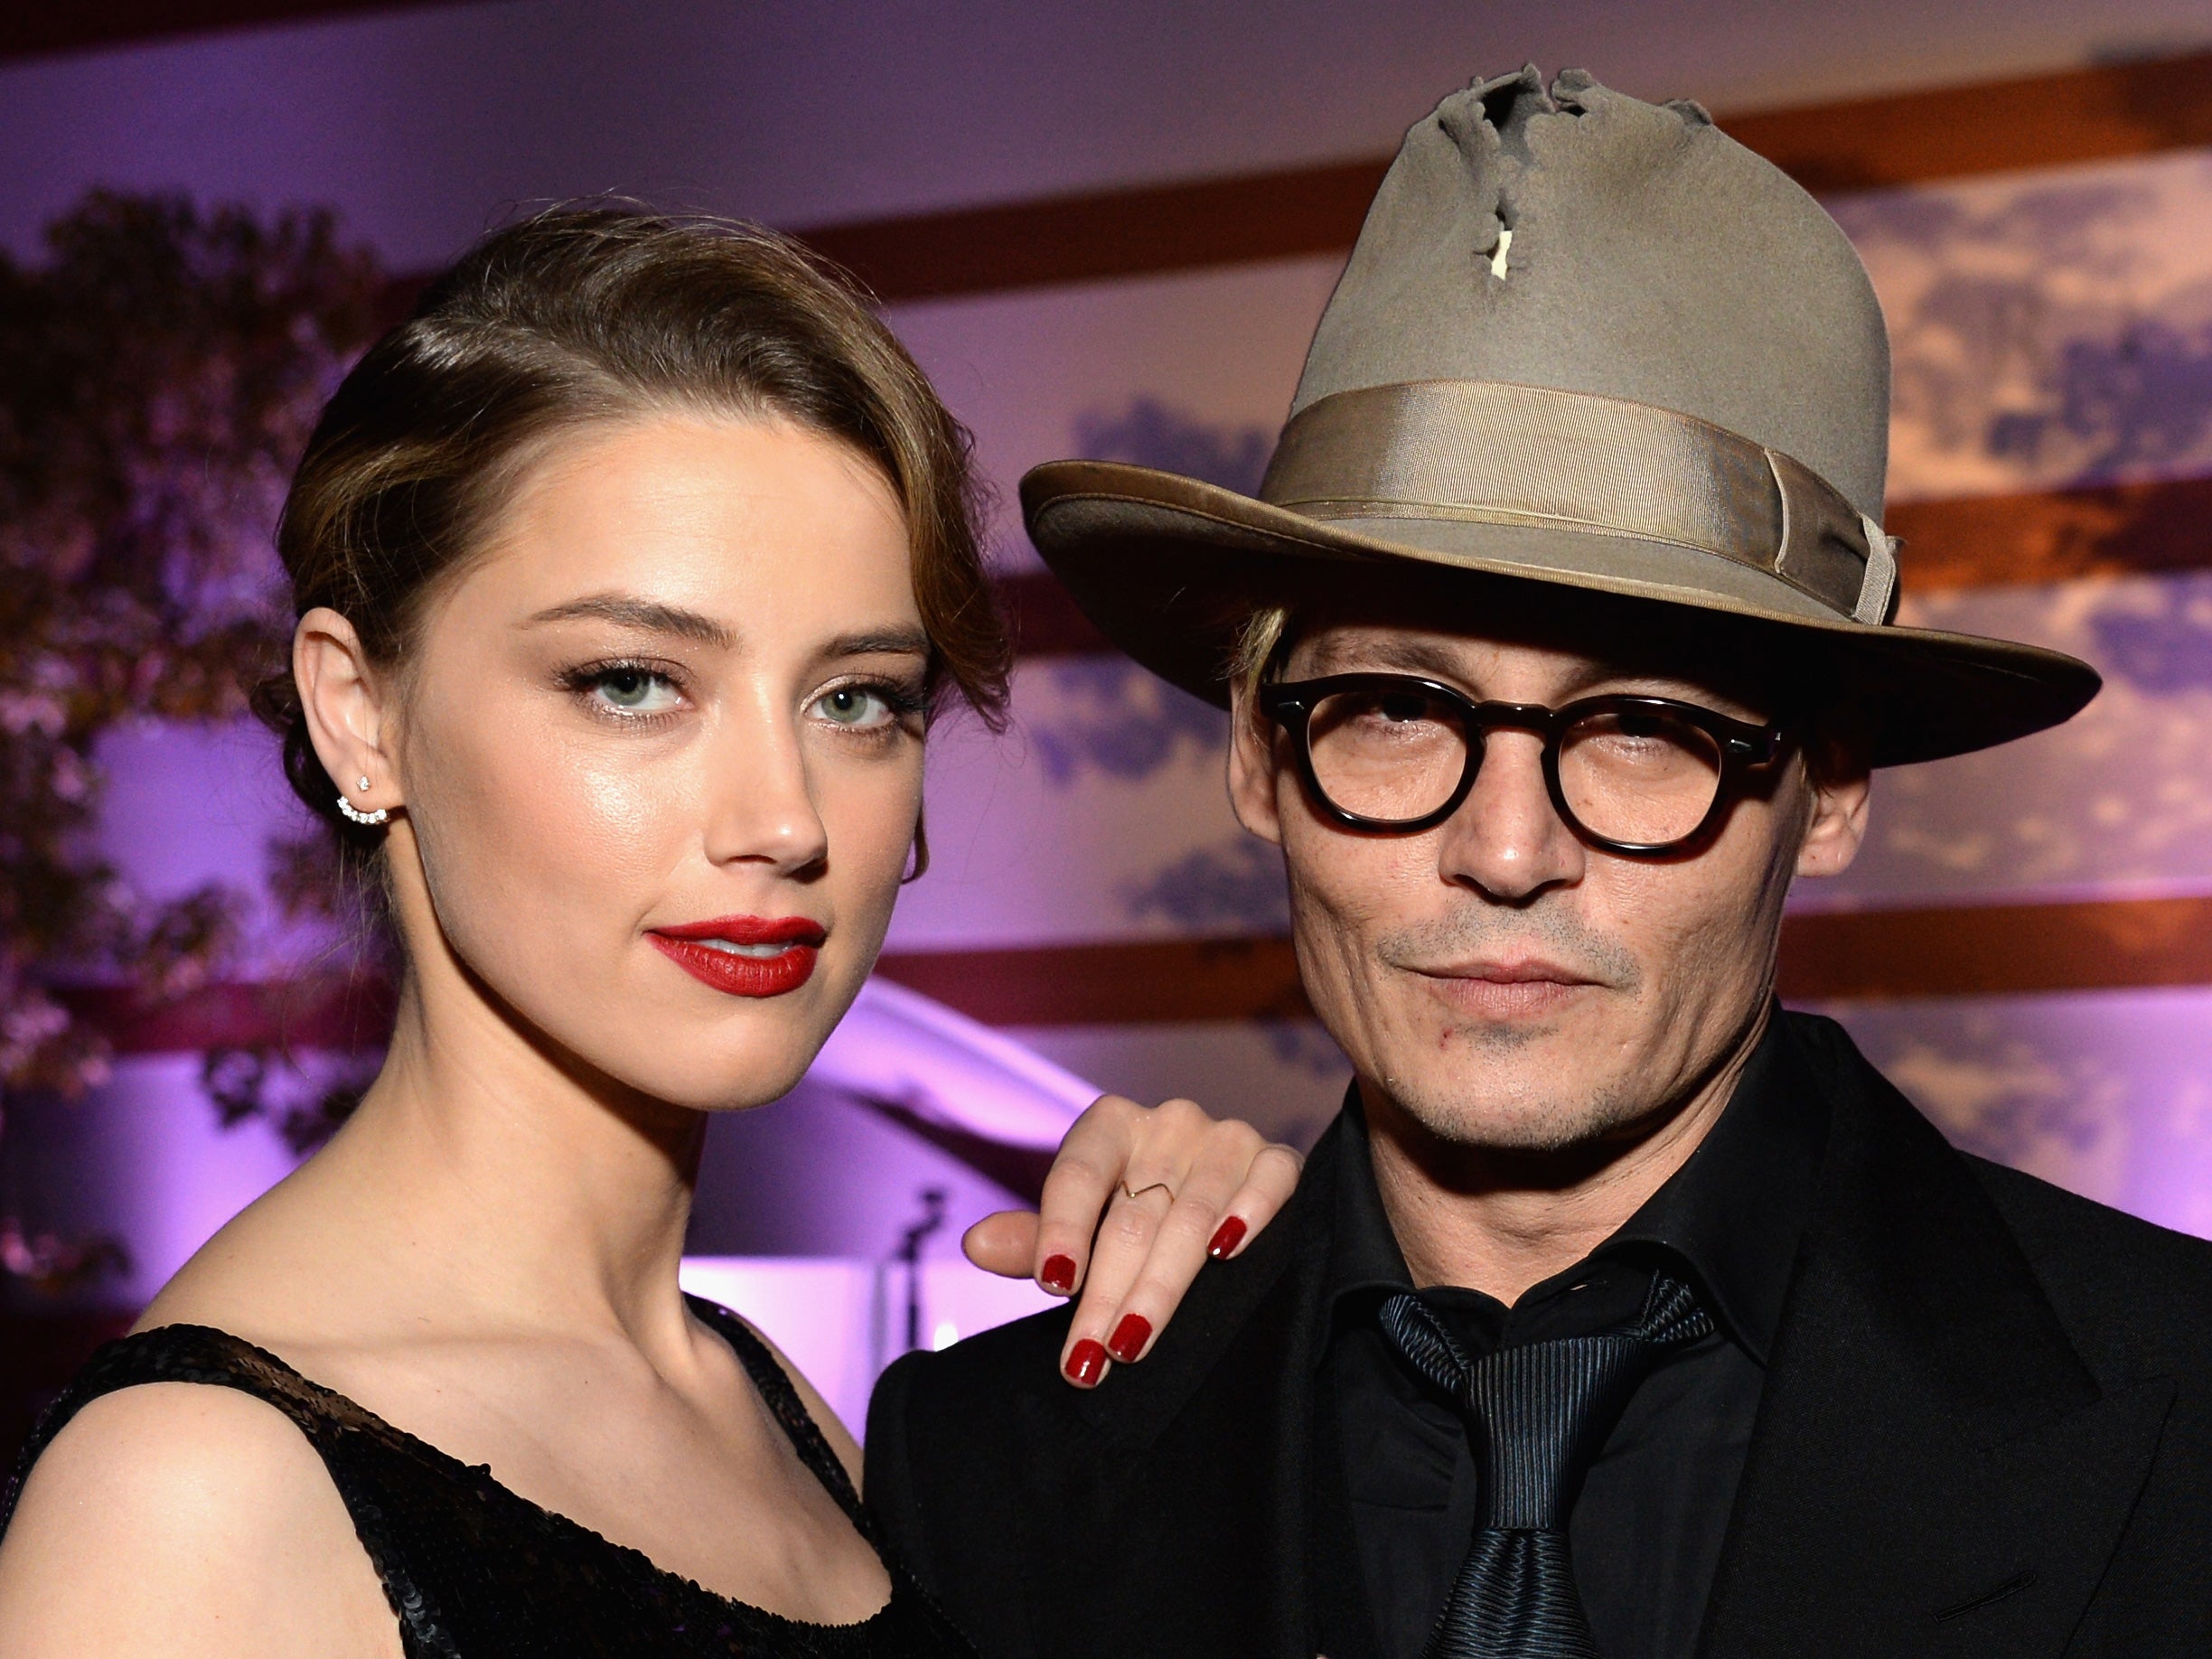 Amber Heard and Johnny Depp photographed before their separation